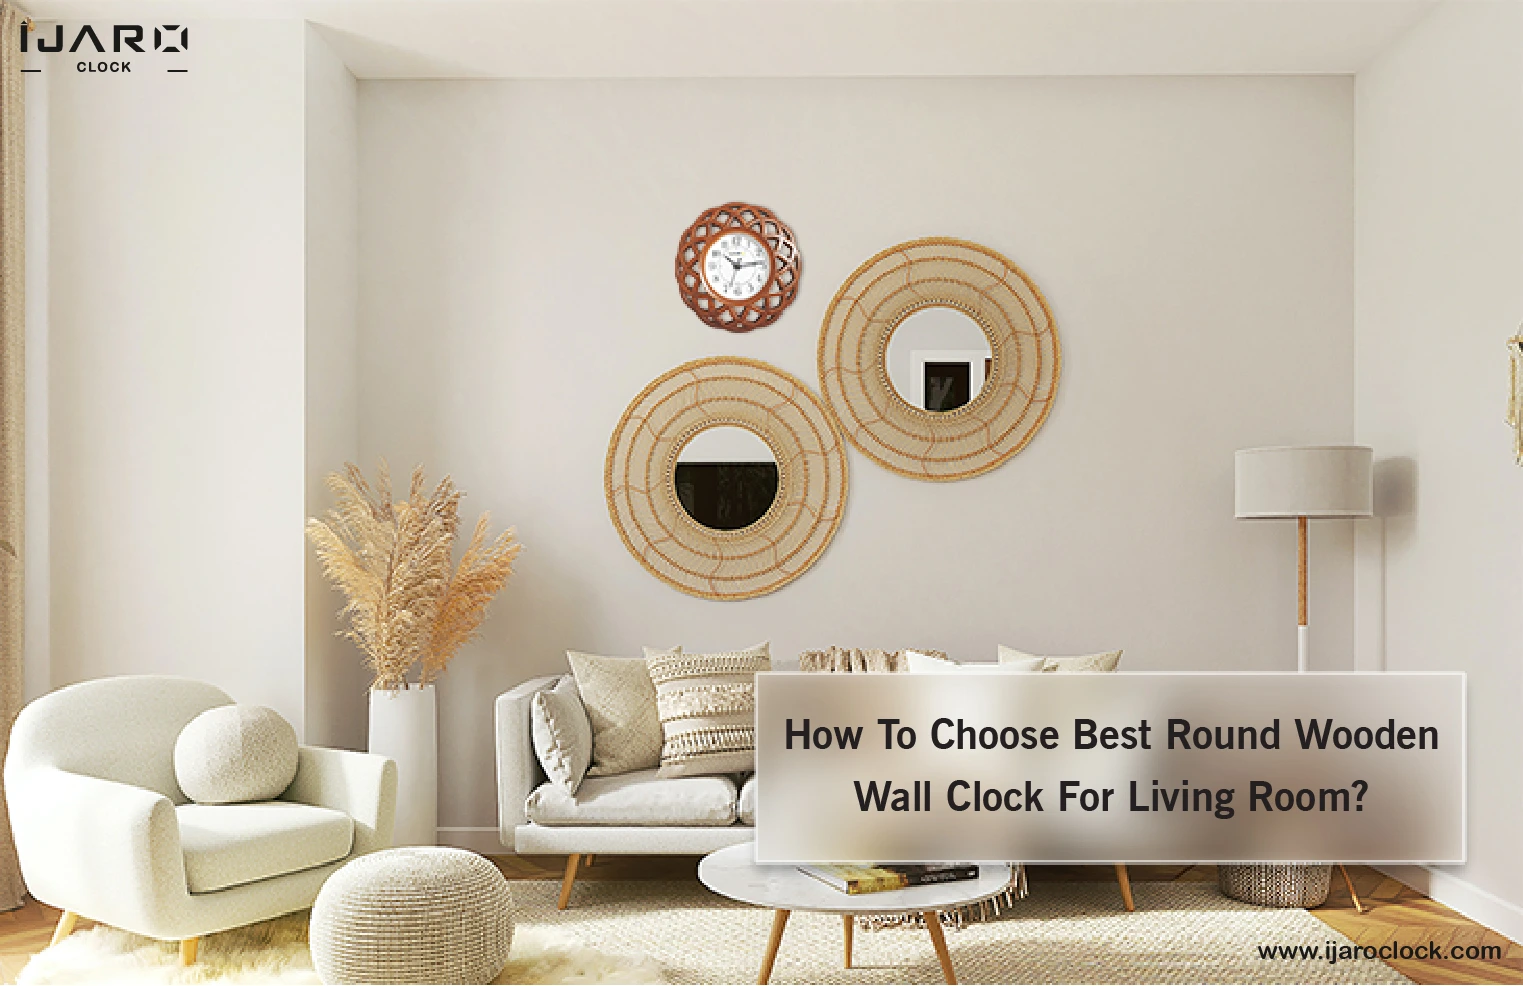 How To Choose Best Round Wall Clock For Living Room?